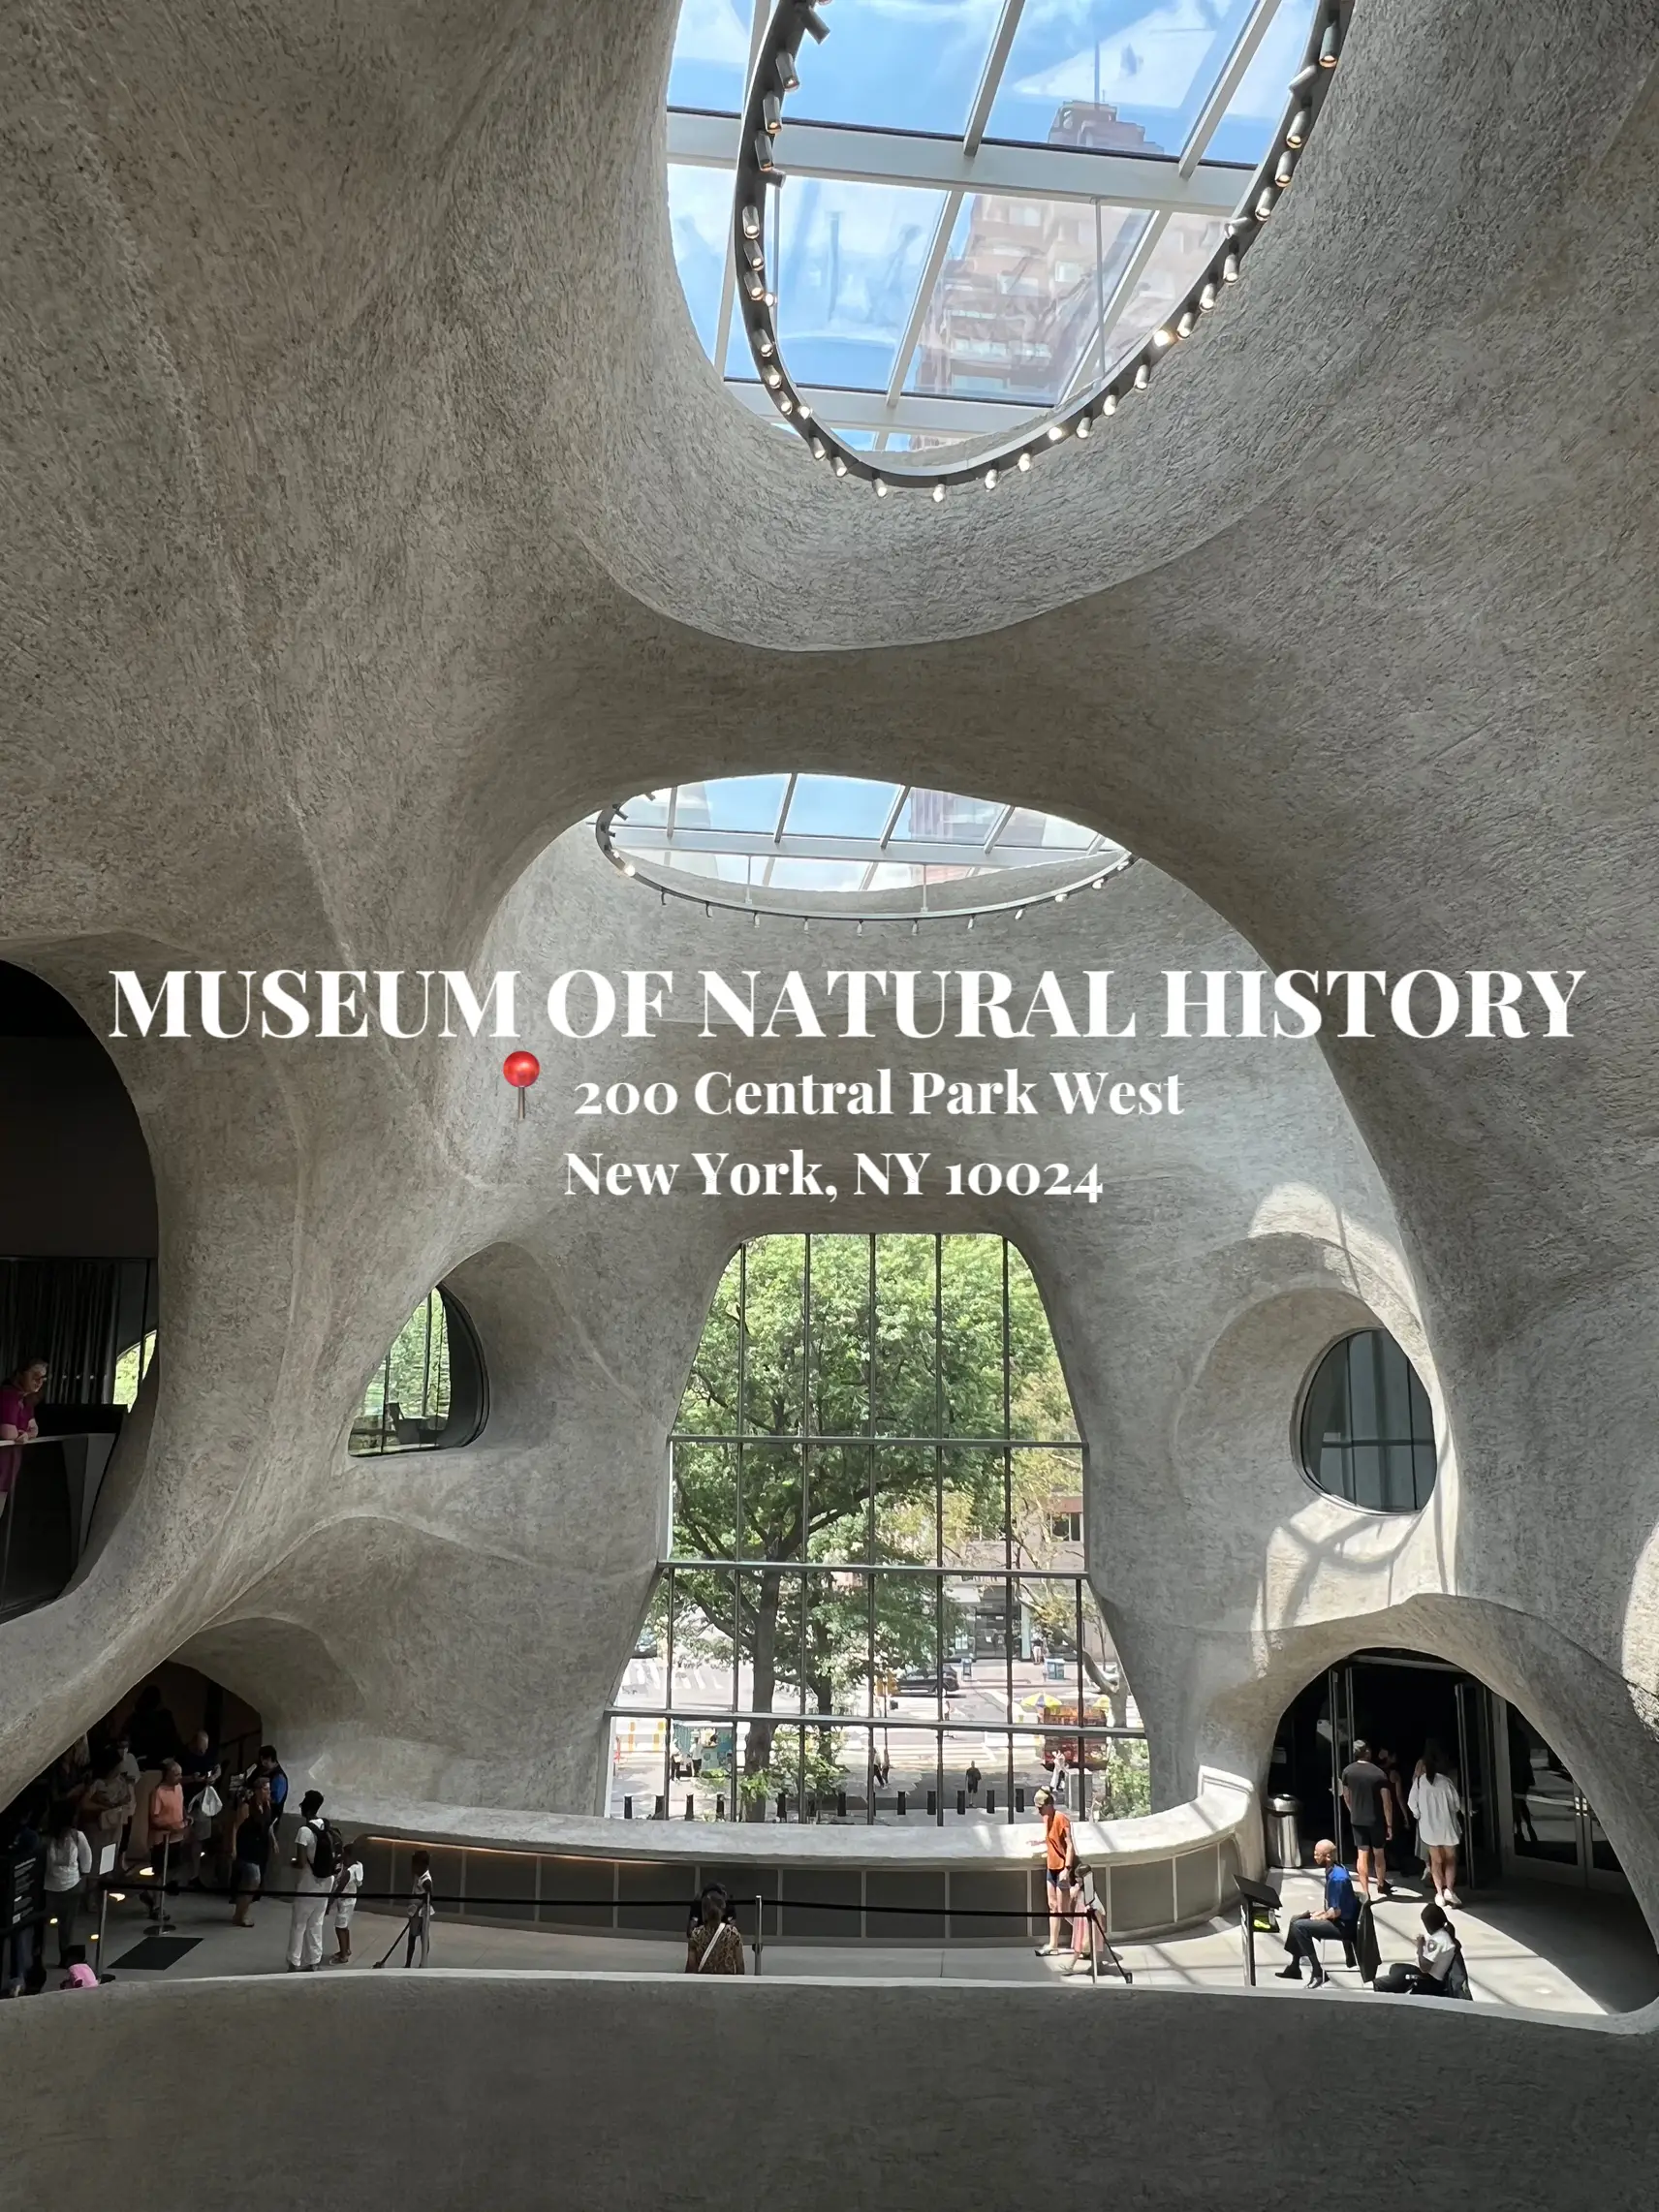 AMERICAN MUSEUM OF NATURAL HISTORY's images